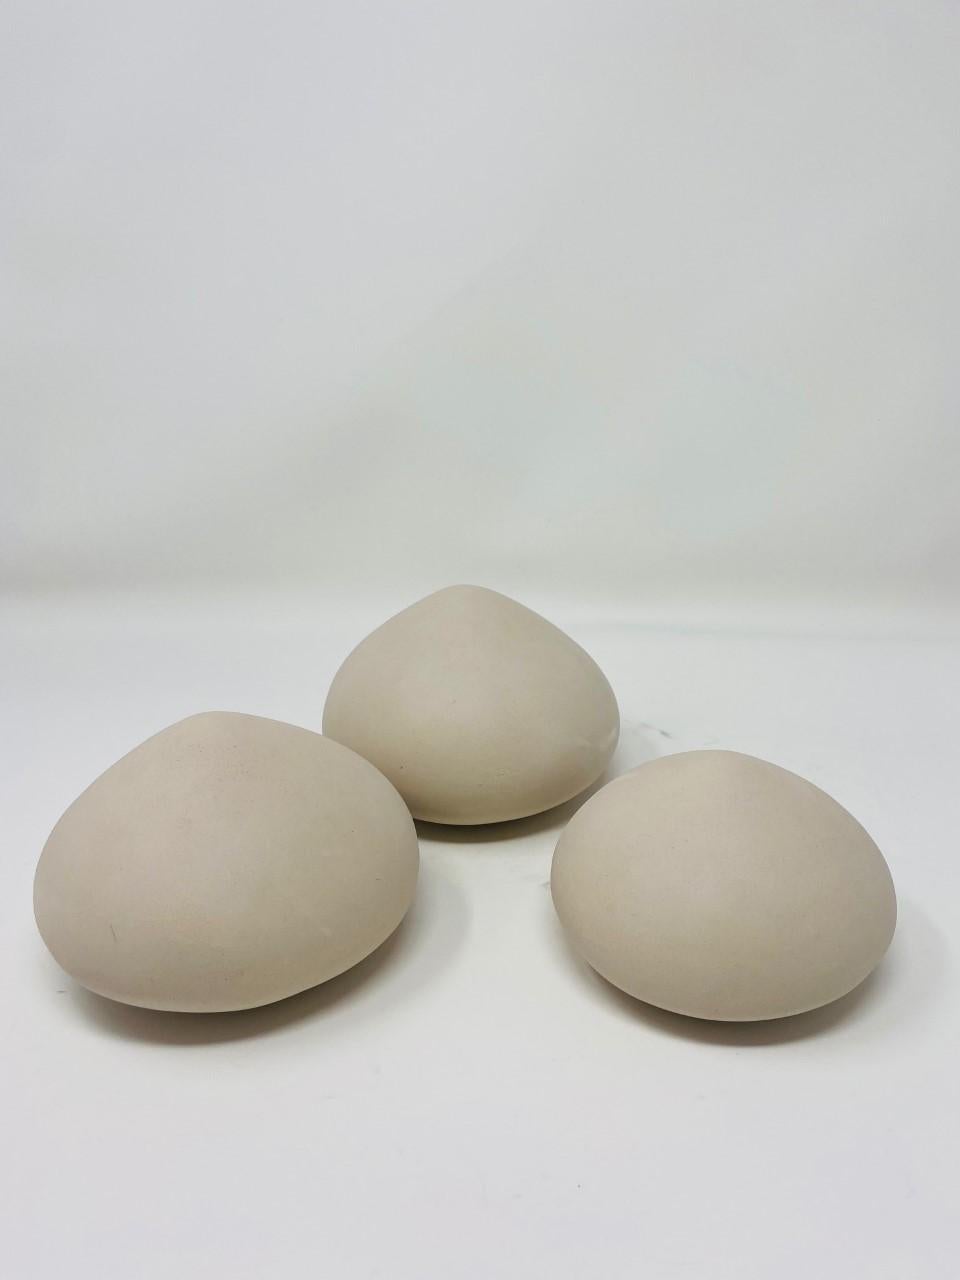 Minimalist Abstract Cocoon Shaped Ceramic Sculptures by Artist Judith Pike 1990s For Sale 3